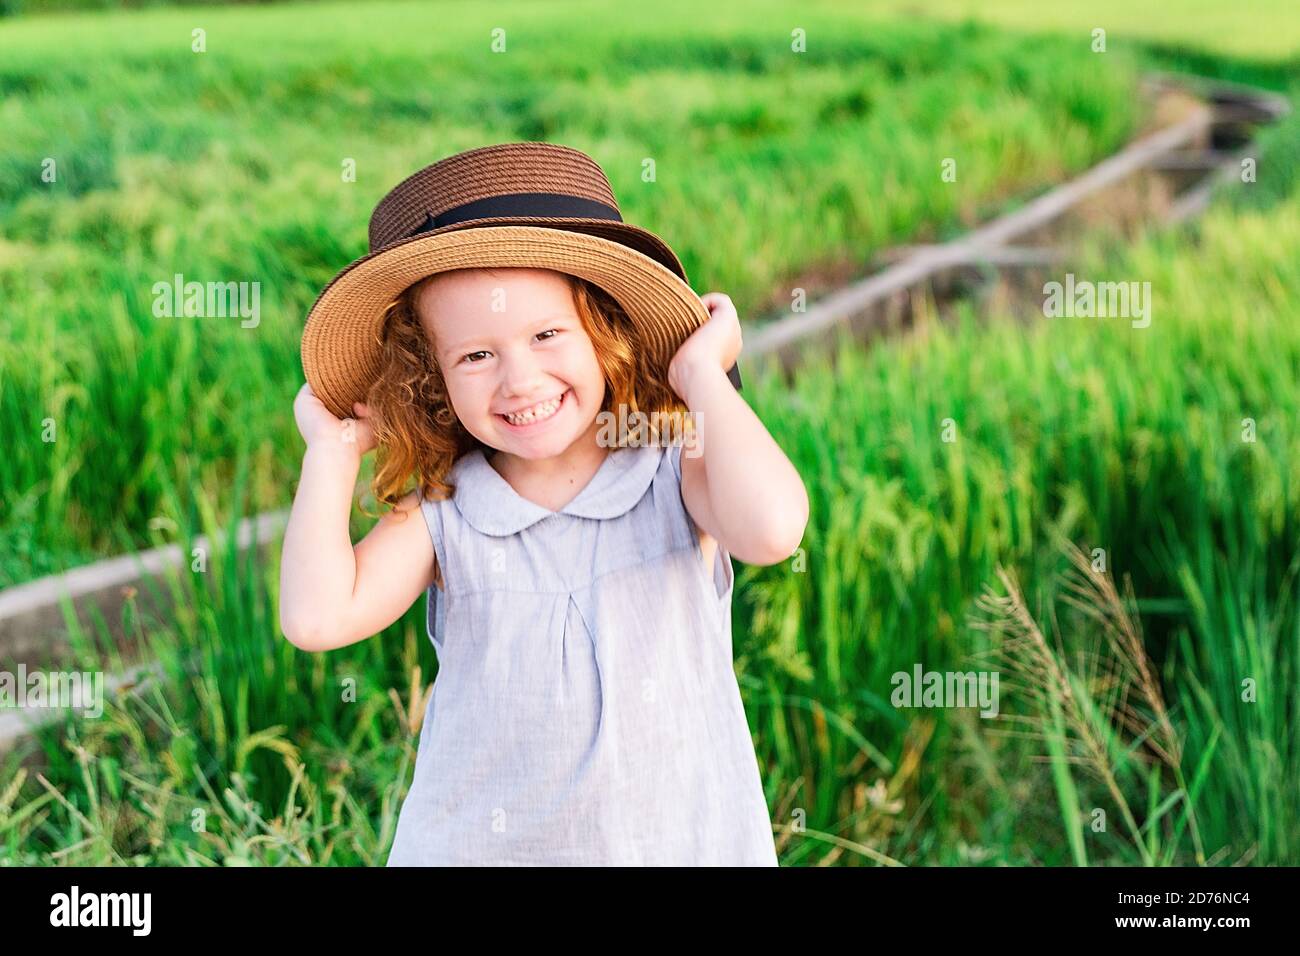 Child girl in straw hat. Cute kid looking at nature lanscape background. Adventure travel concept in retro style Stock Photo